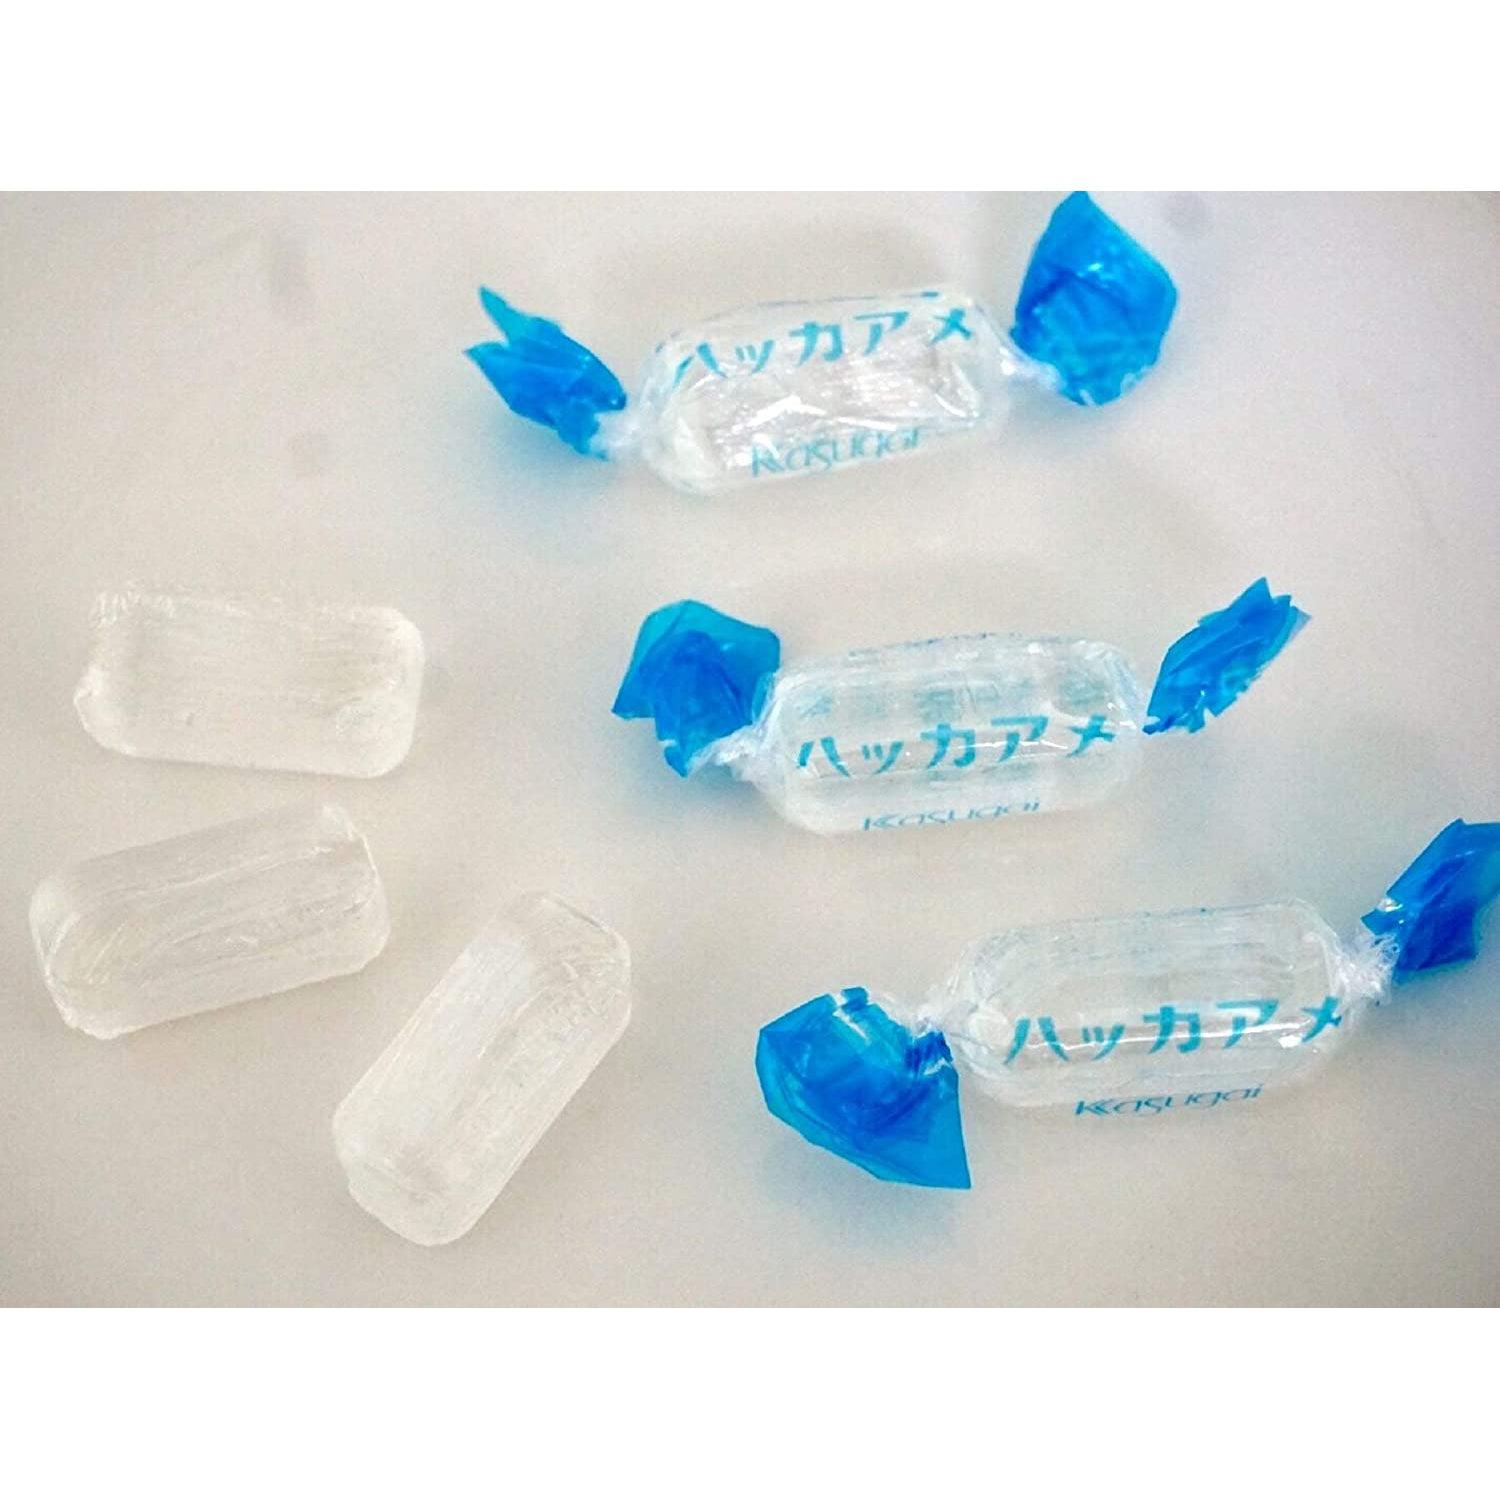 Kasugai Mint Candy Japanese Peppermint Flavored Hard Candy 150g